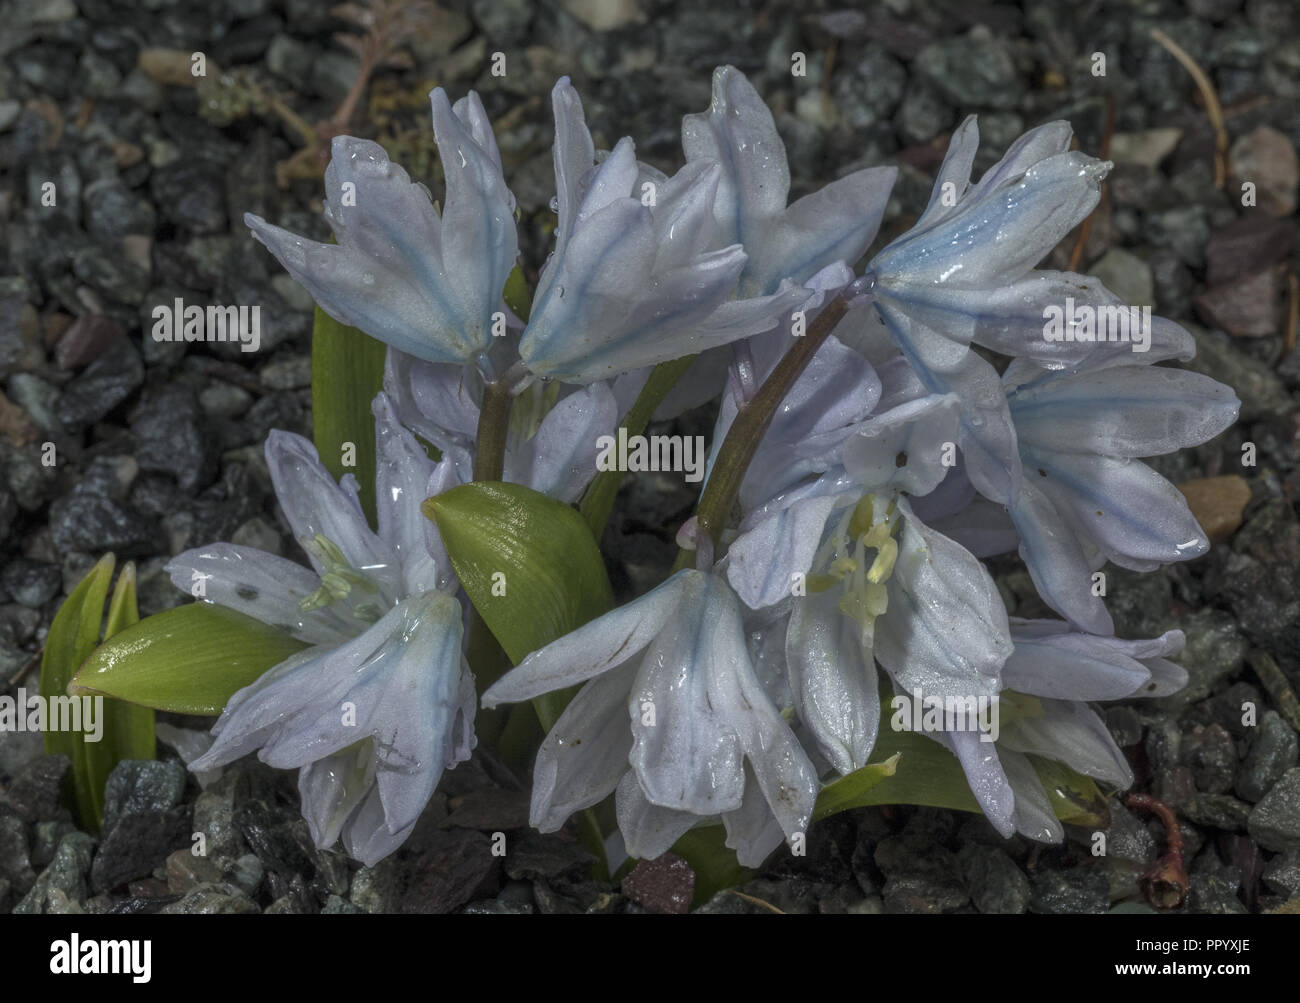 Scilla mischtschenkoana - spring-flowering bulbous plant from the southern Caucasus. Stock Photo